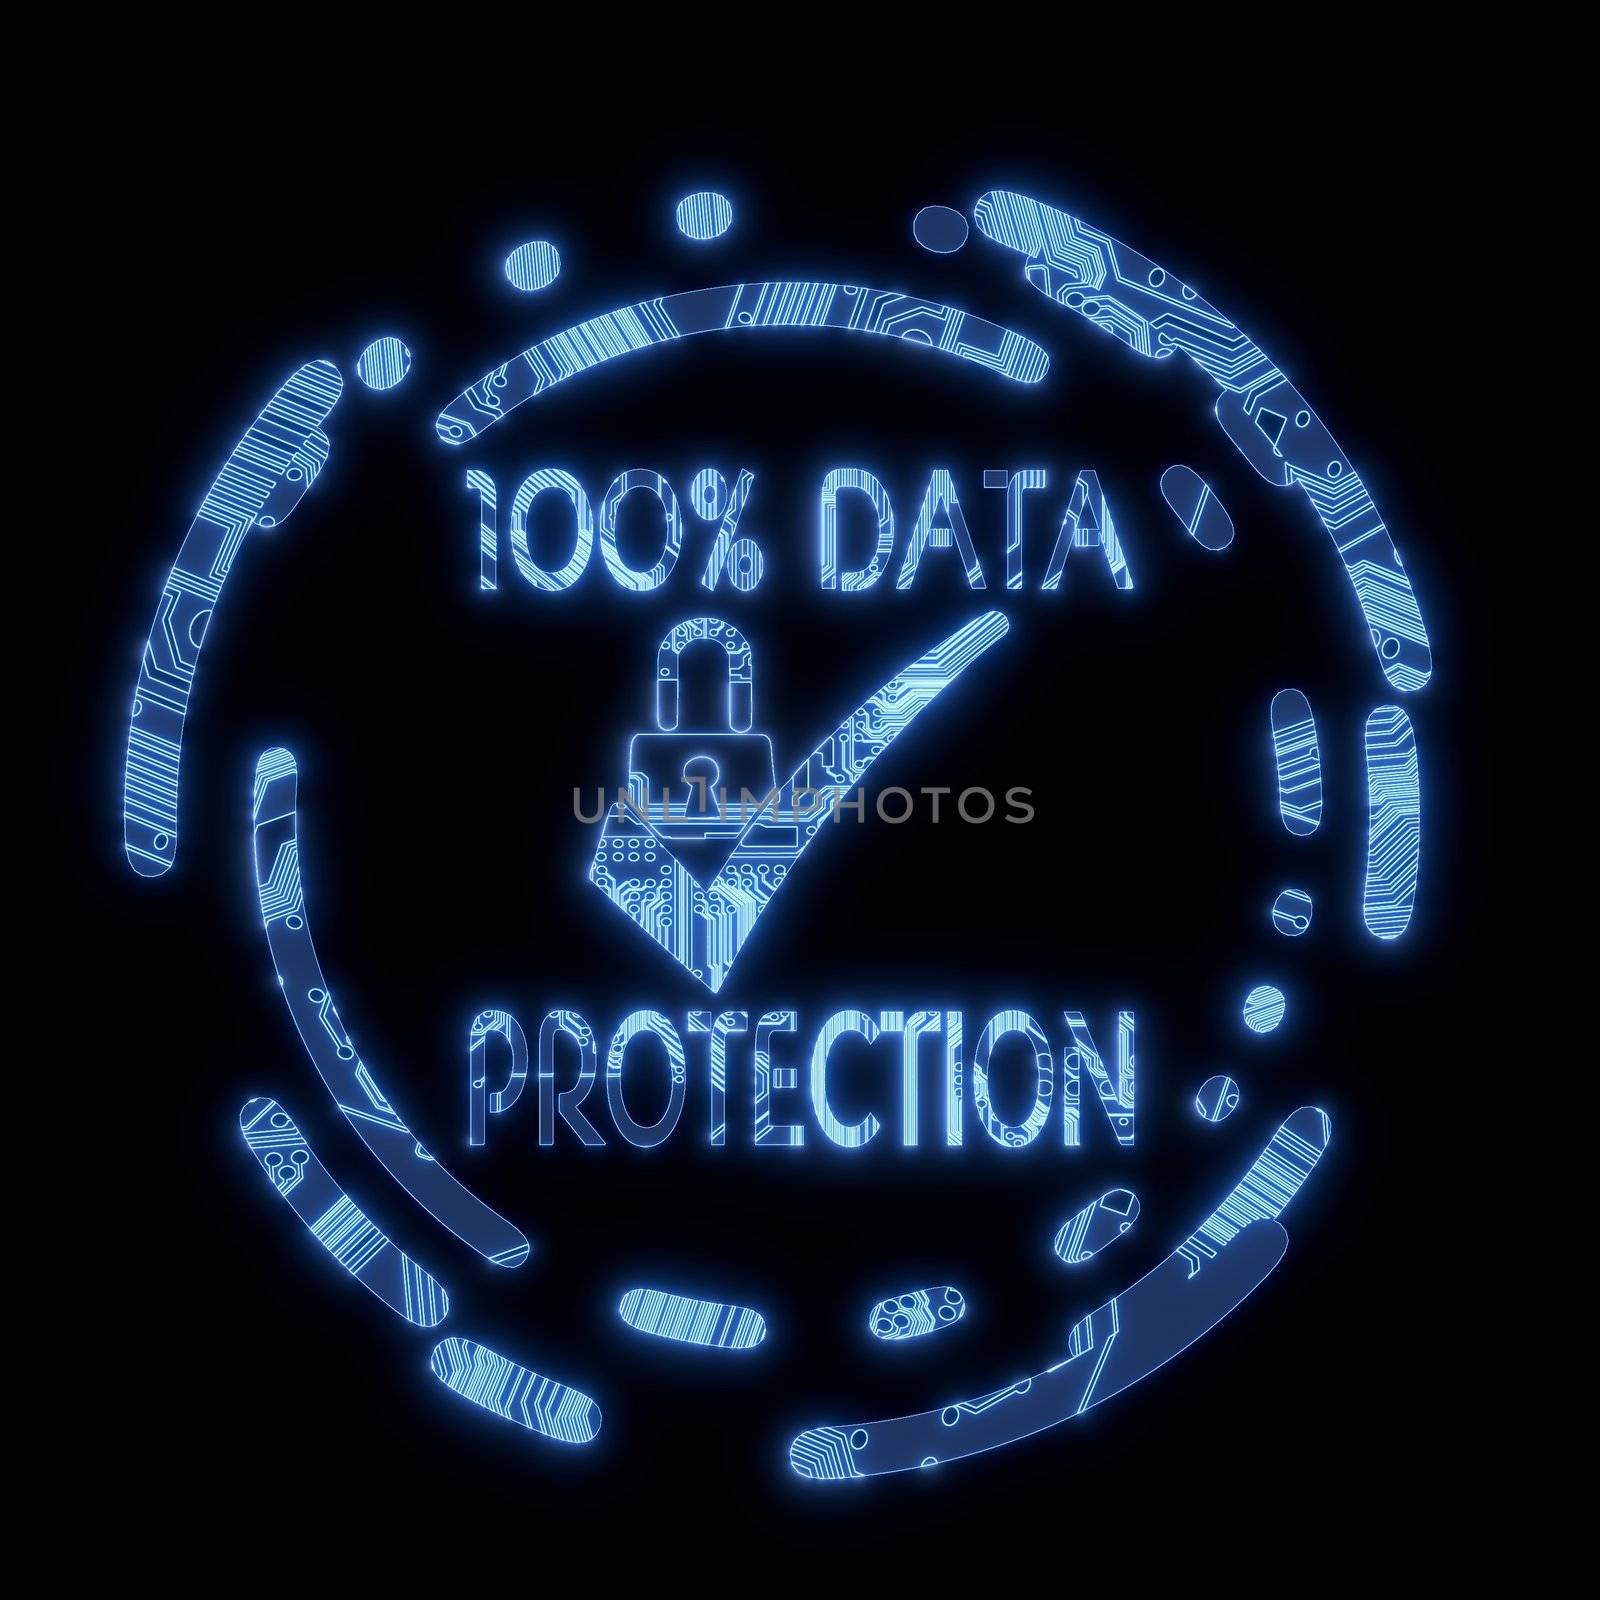 3D Graphic Steel blue electric glowing data protection symbol in a dark background on a computer chip